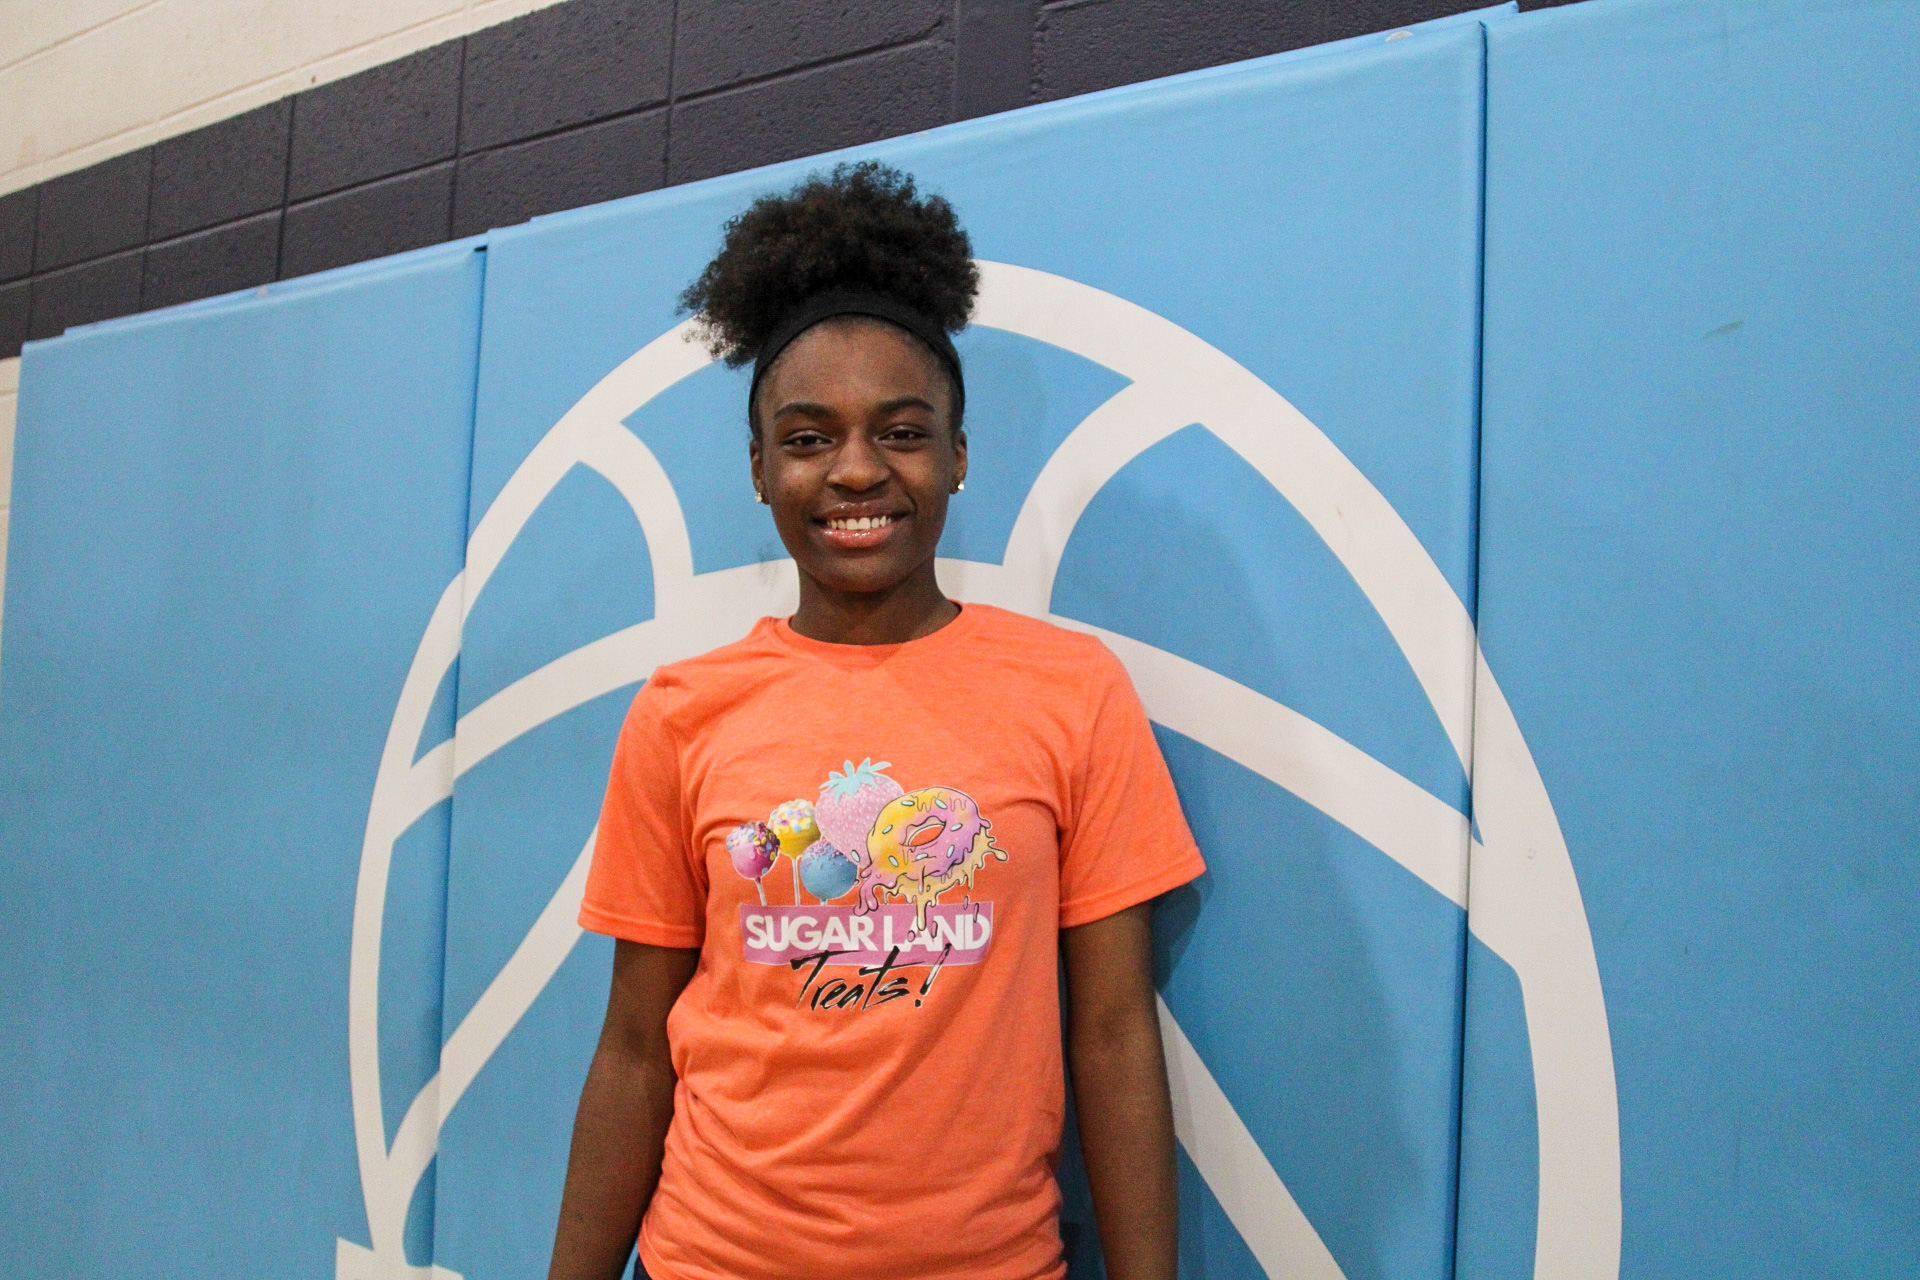 15-year-old hits the sweet spot through her small business with the help of Memphis Athletic Ministries